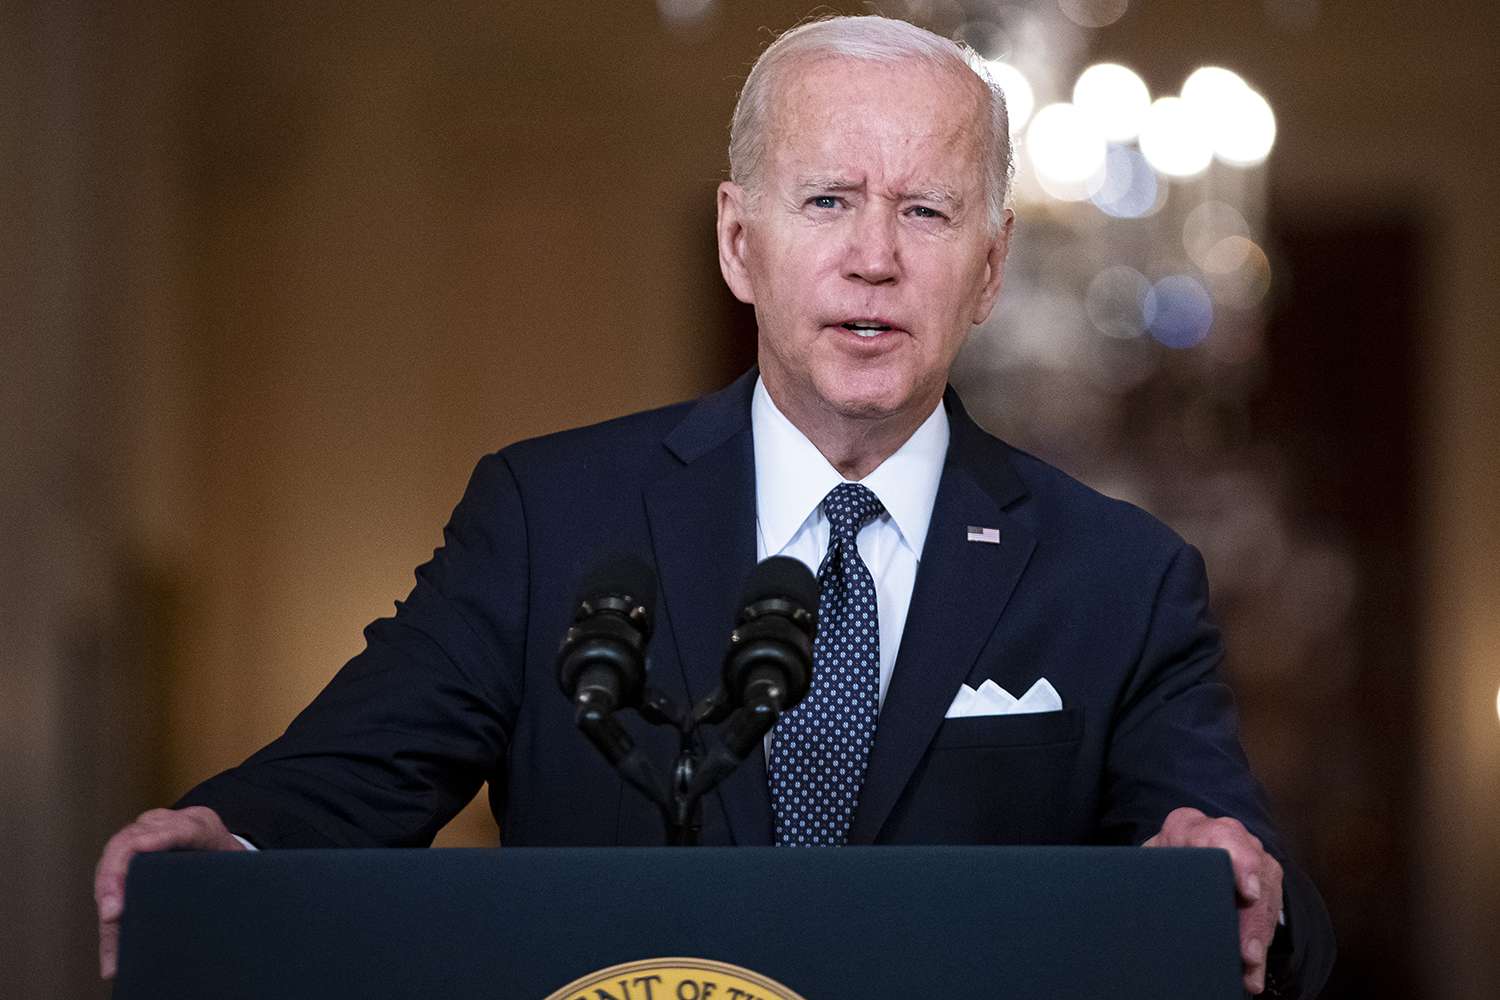 President Biden Calls for a 'Unity Agenda' of Life-Saving New Gun Laws: 'Here's What I Believe We Have to Do'